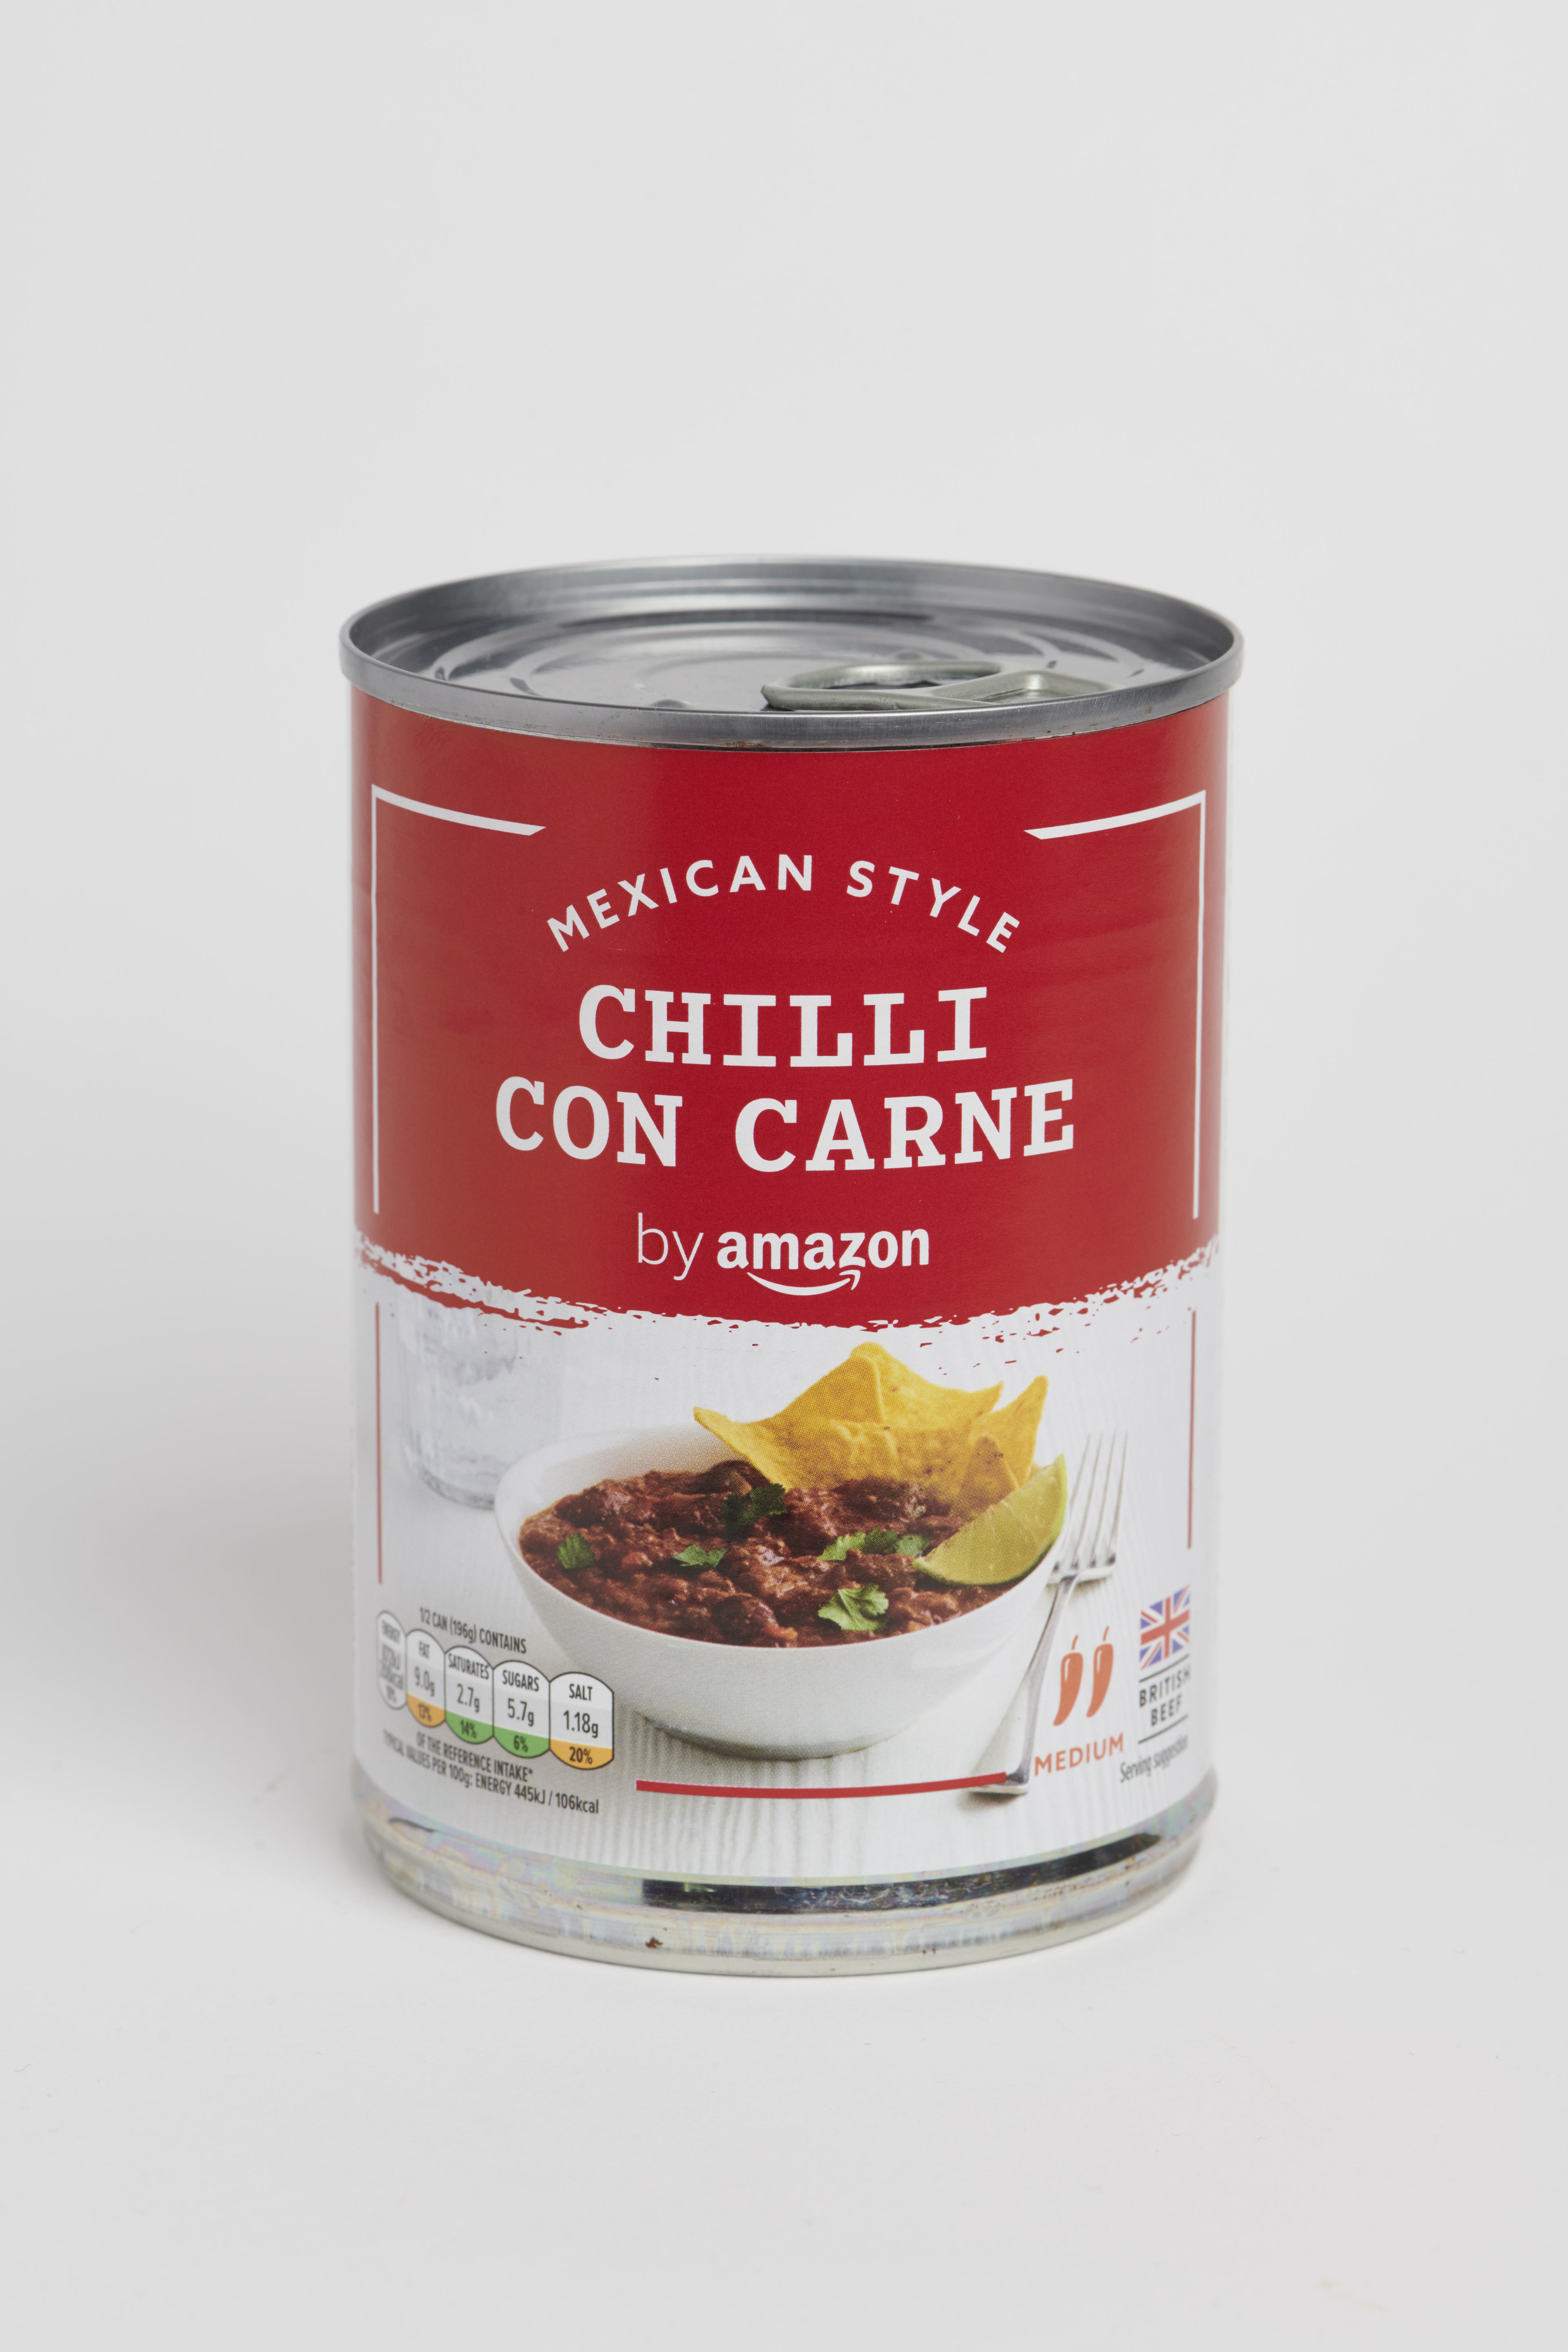 This chilli is delicious - and you could easily get three portions out of one can